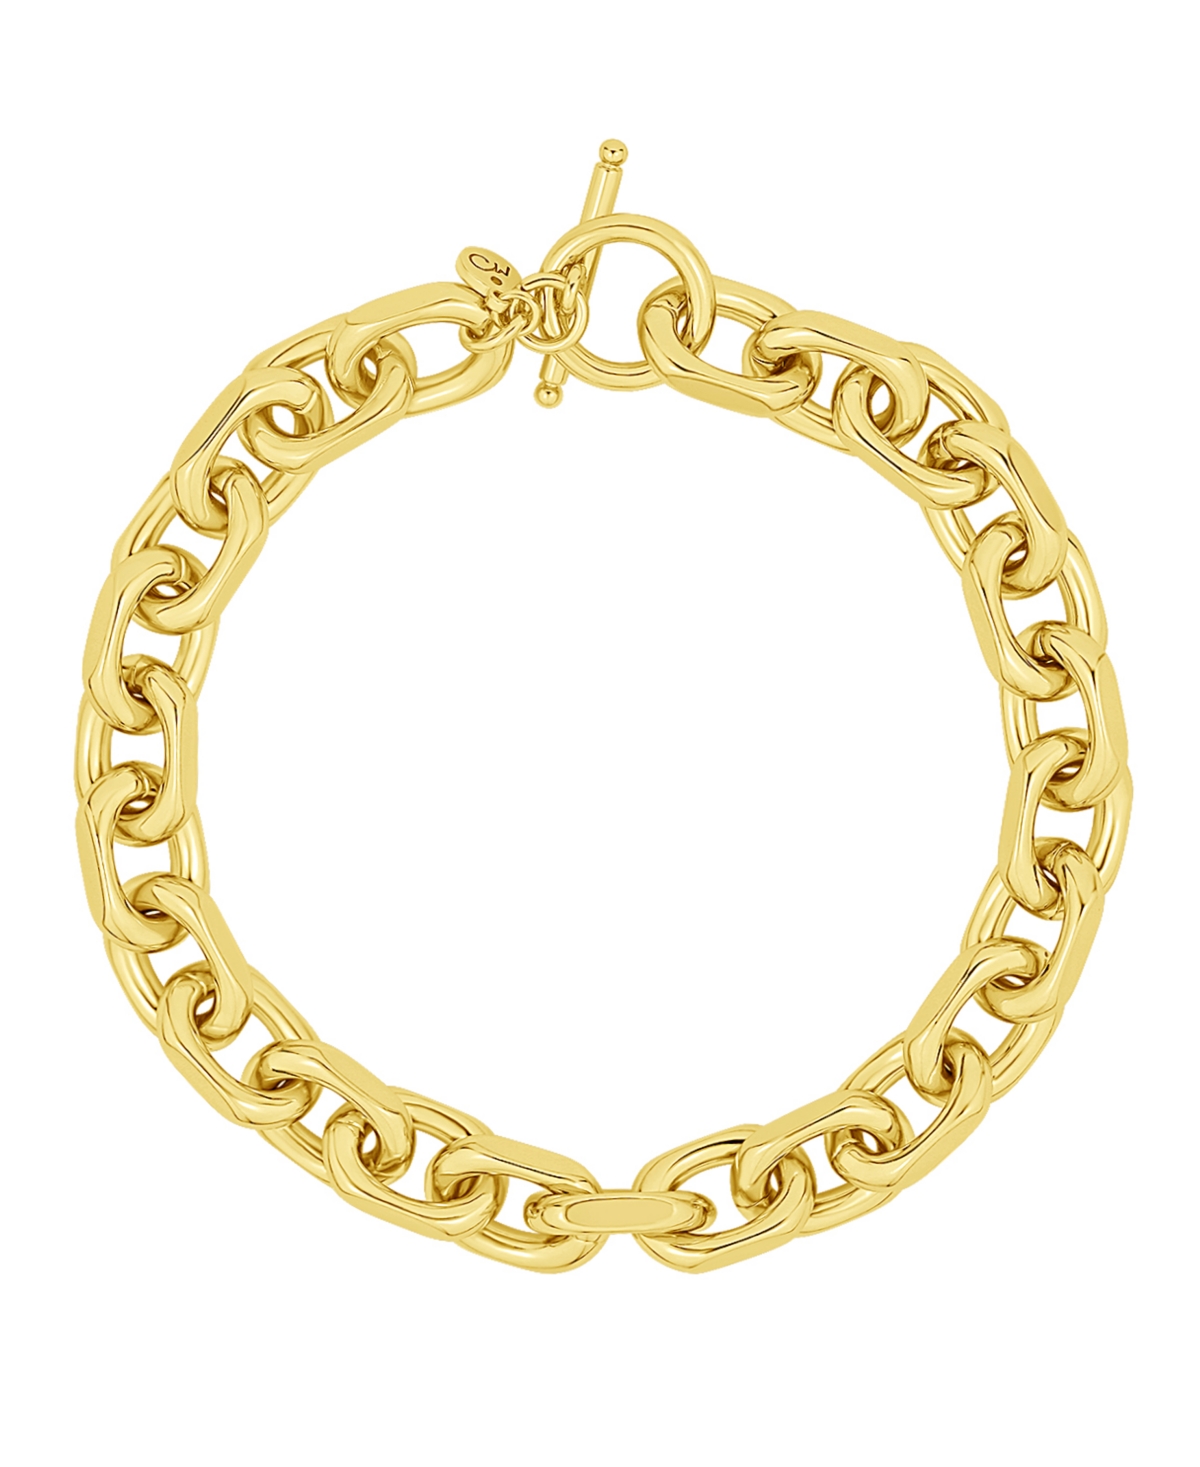 And Now This Silver-plated Or 18k Gold-plated Oval Chain Toggle Bracelet